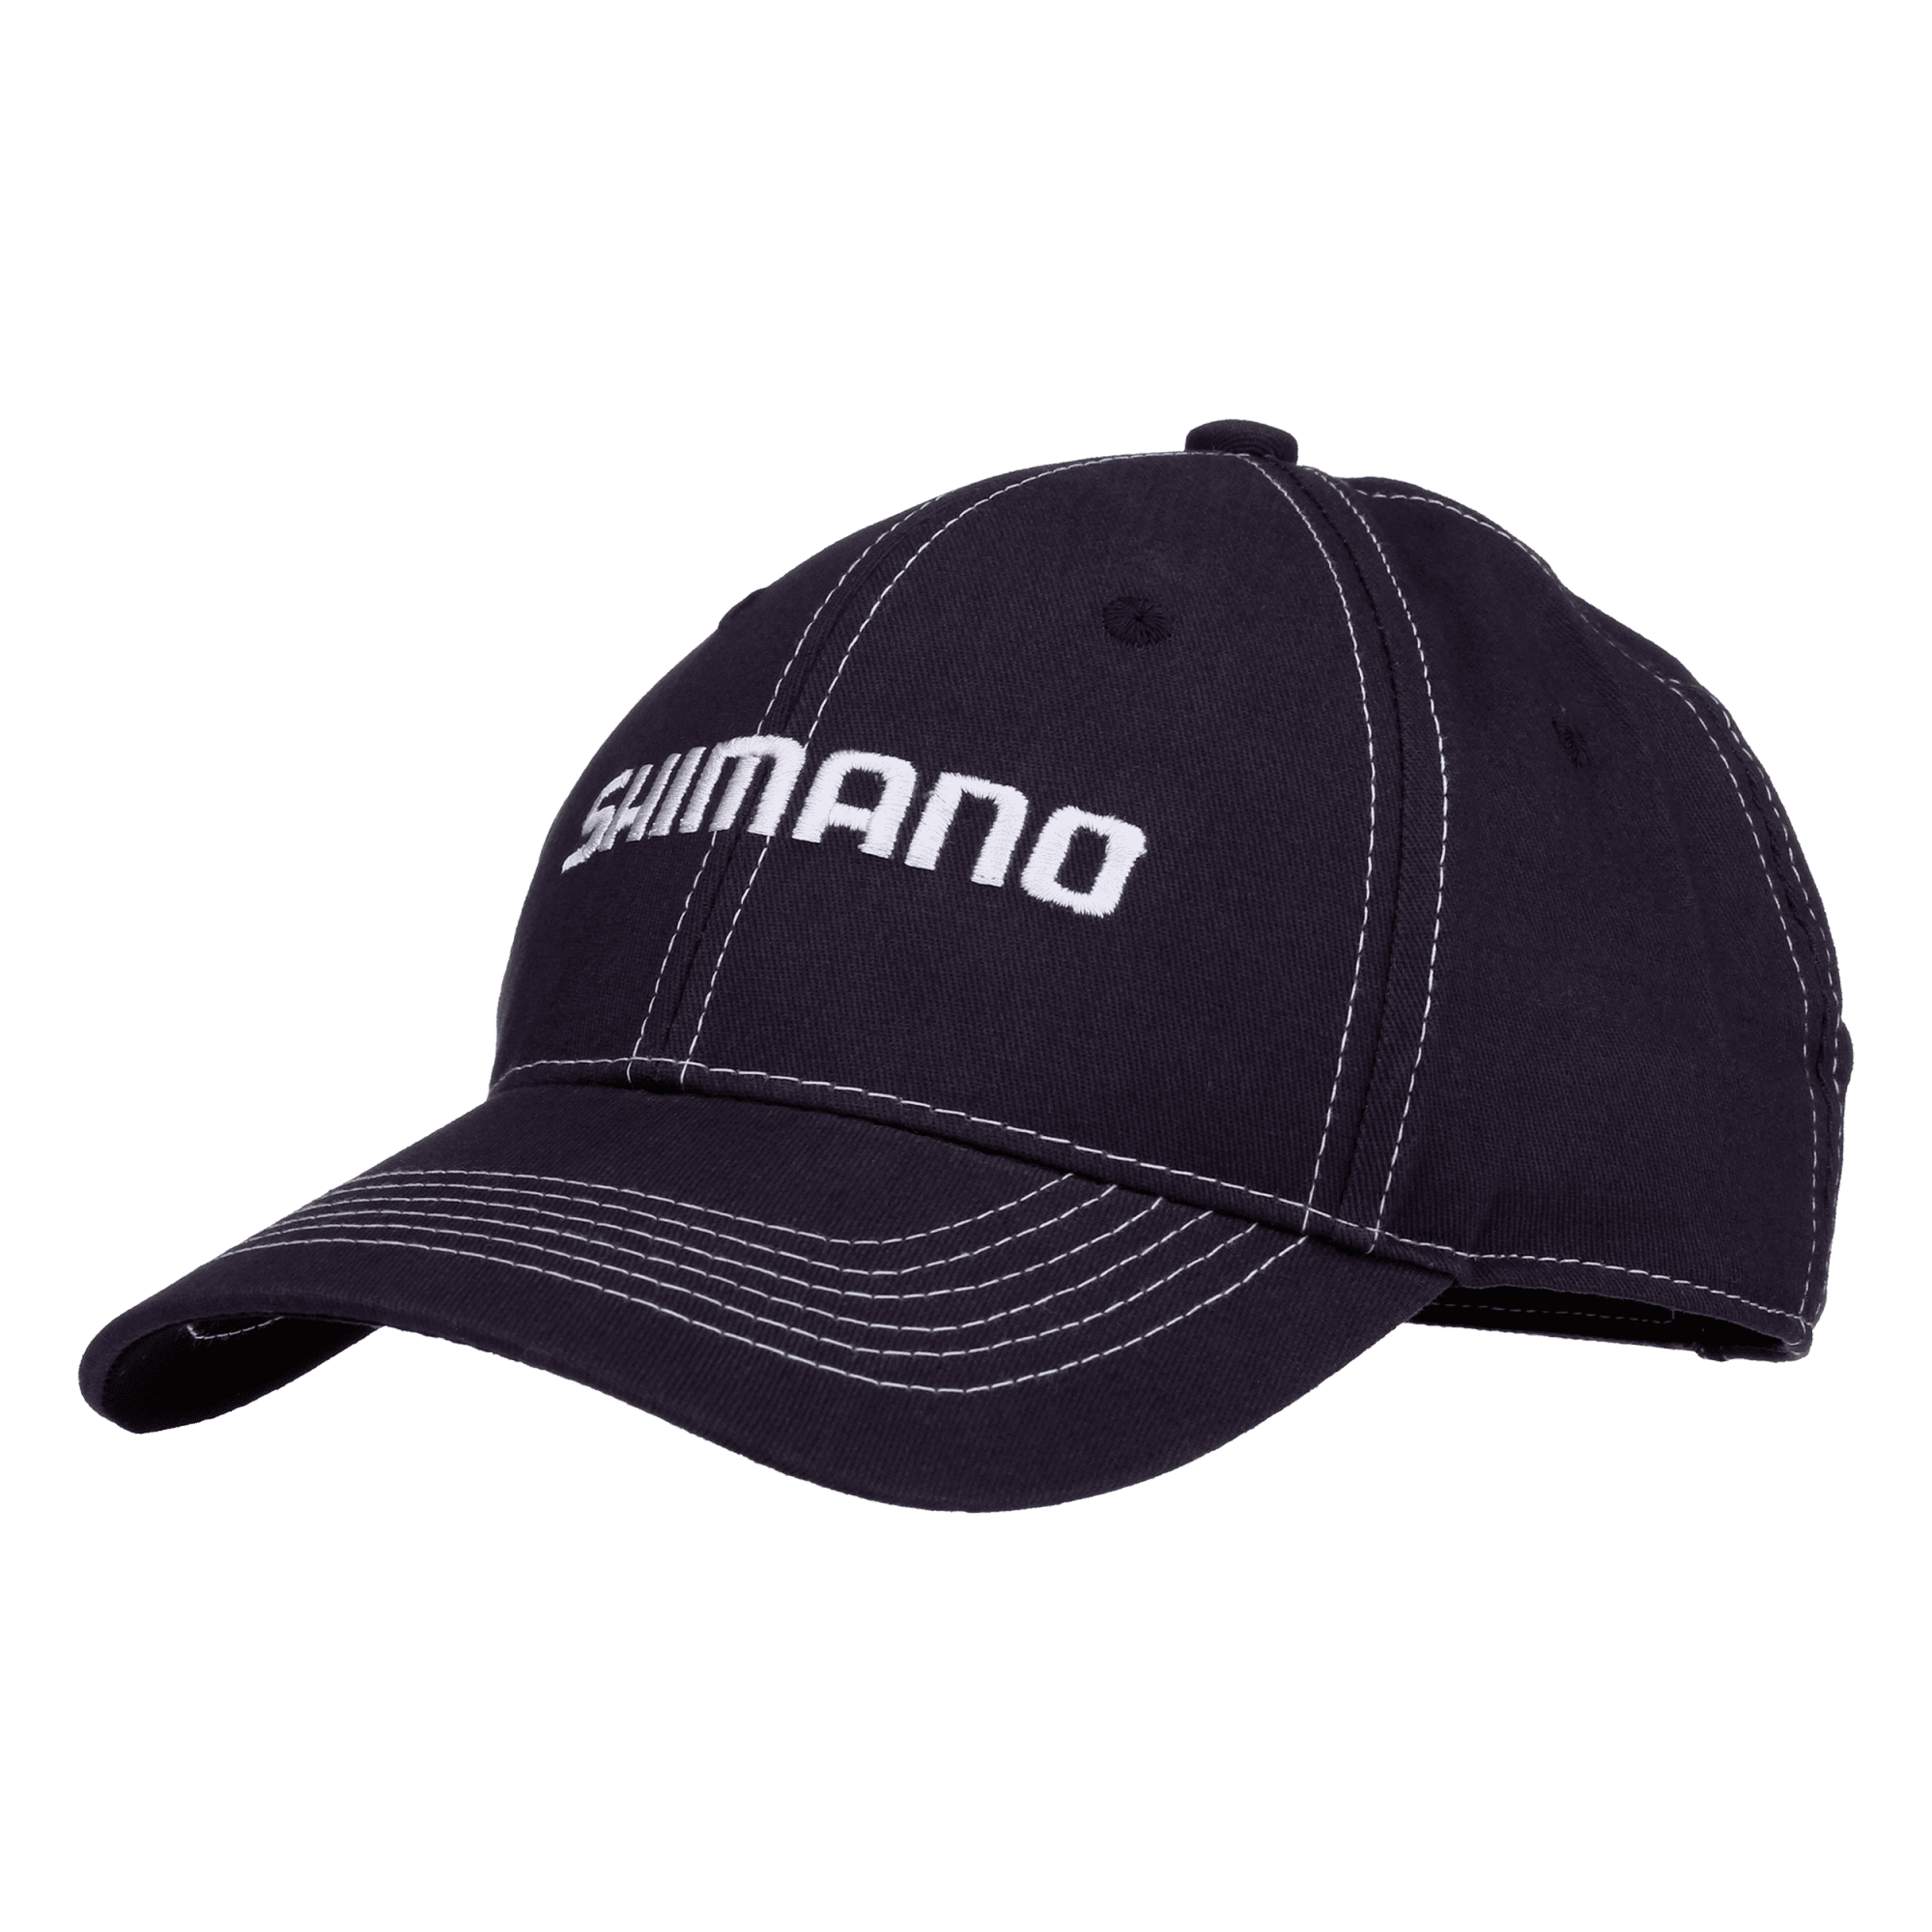 Shimano Fishing Adjustable Caps - Gray, One Size Fits Most [AHAT200GY]